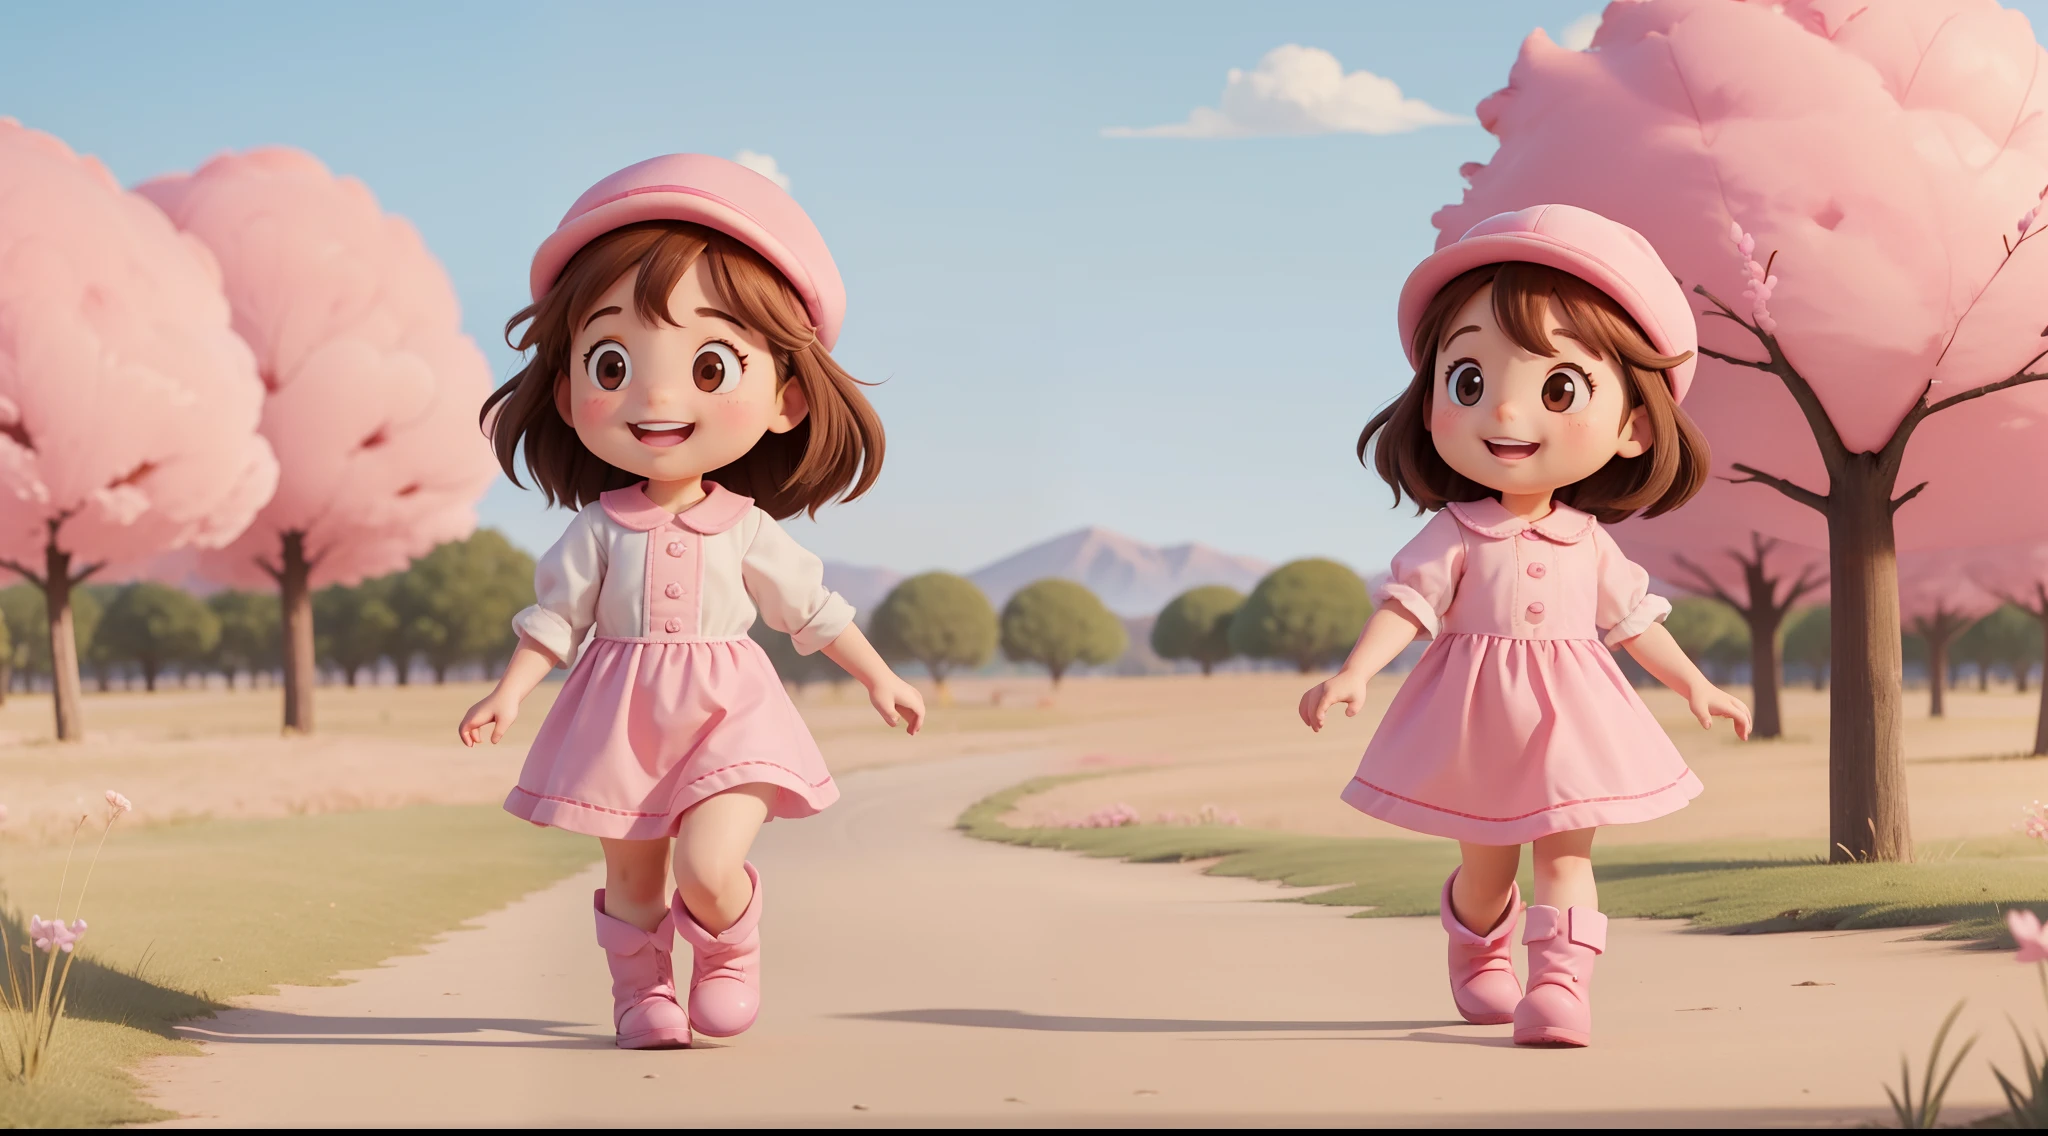 "Profile picture of a  walking, character animation frames, identical character design in the frames, the girl is alone, happy, brown hair, brown eyes, rosy cheeks, pink farm outfit, pink hat, pink boots, vertical image, white background."